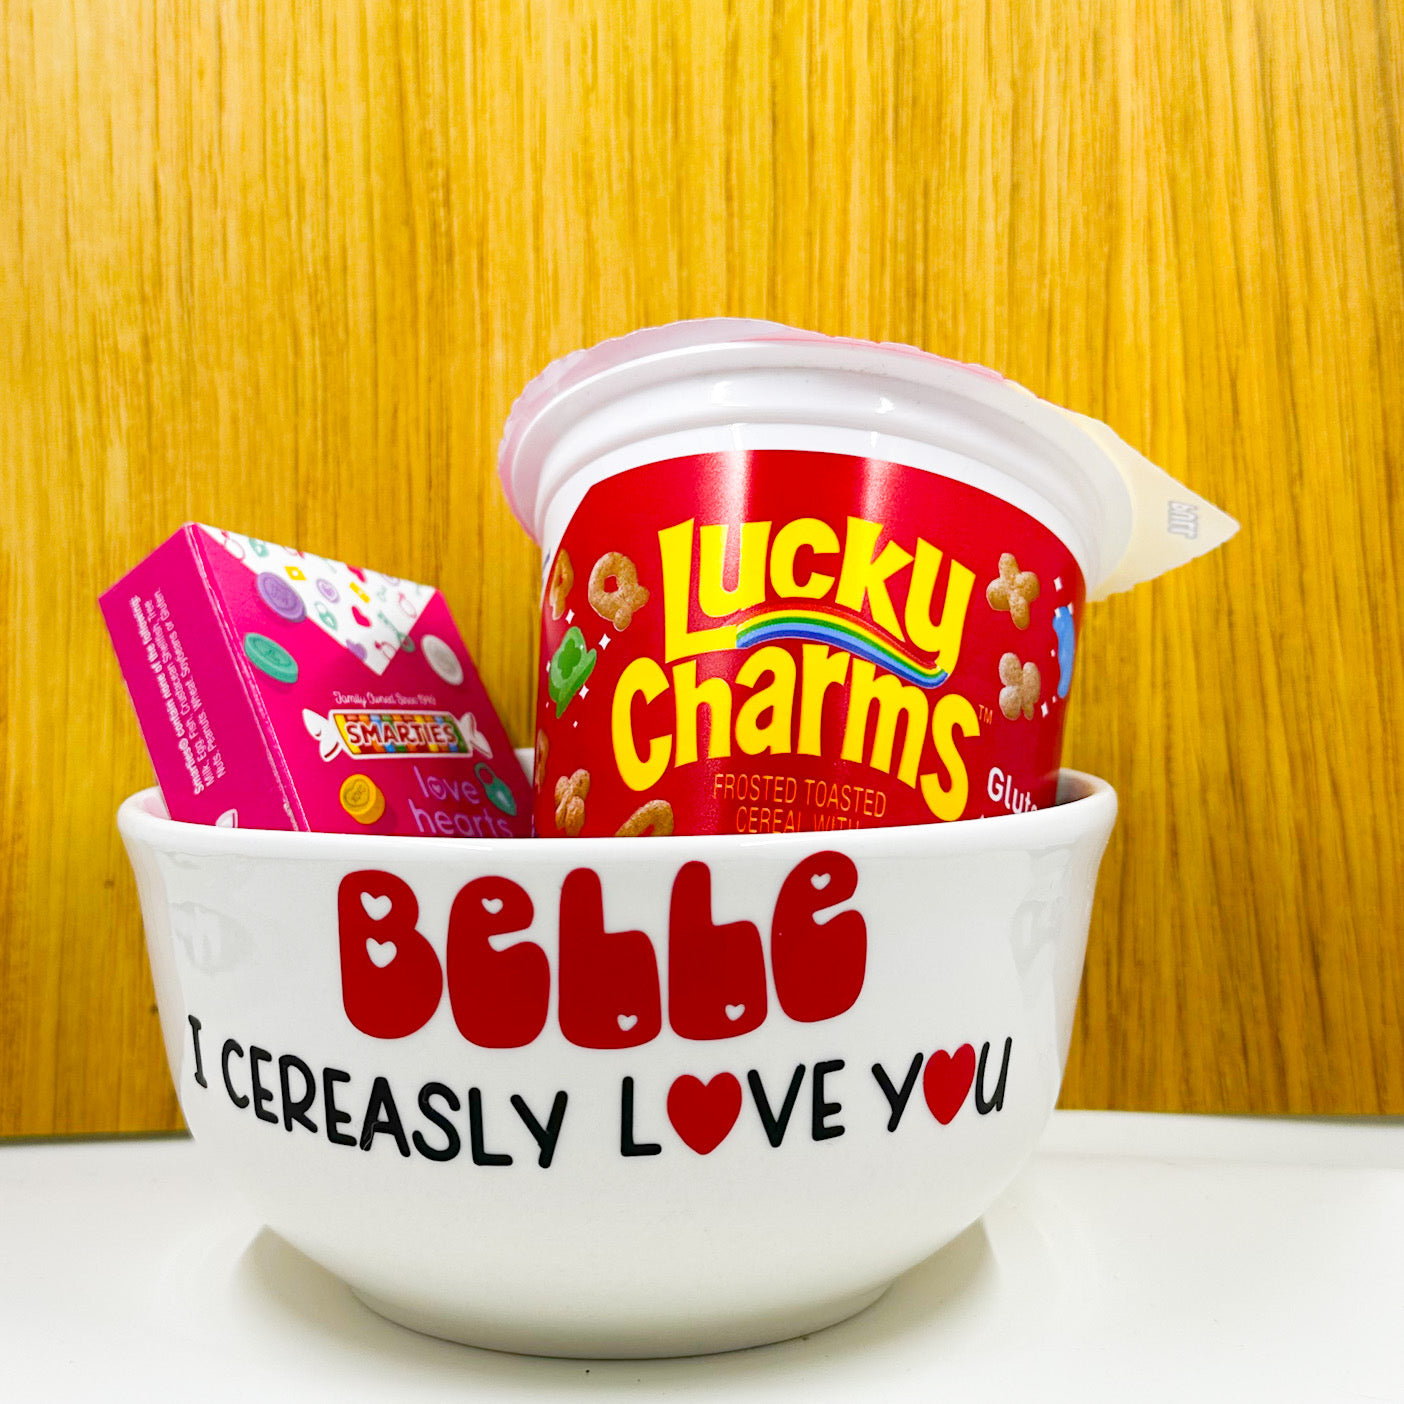 I Cerealsy Love You Personalized Valentine Bowl